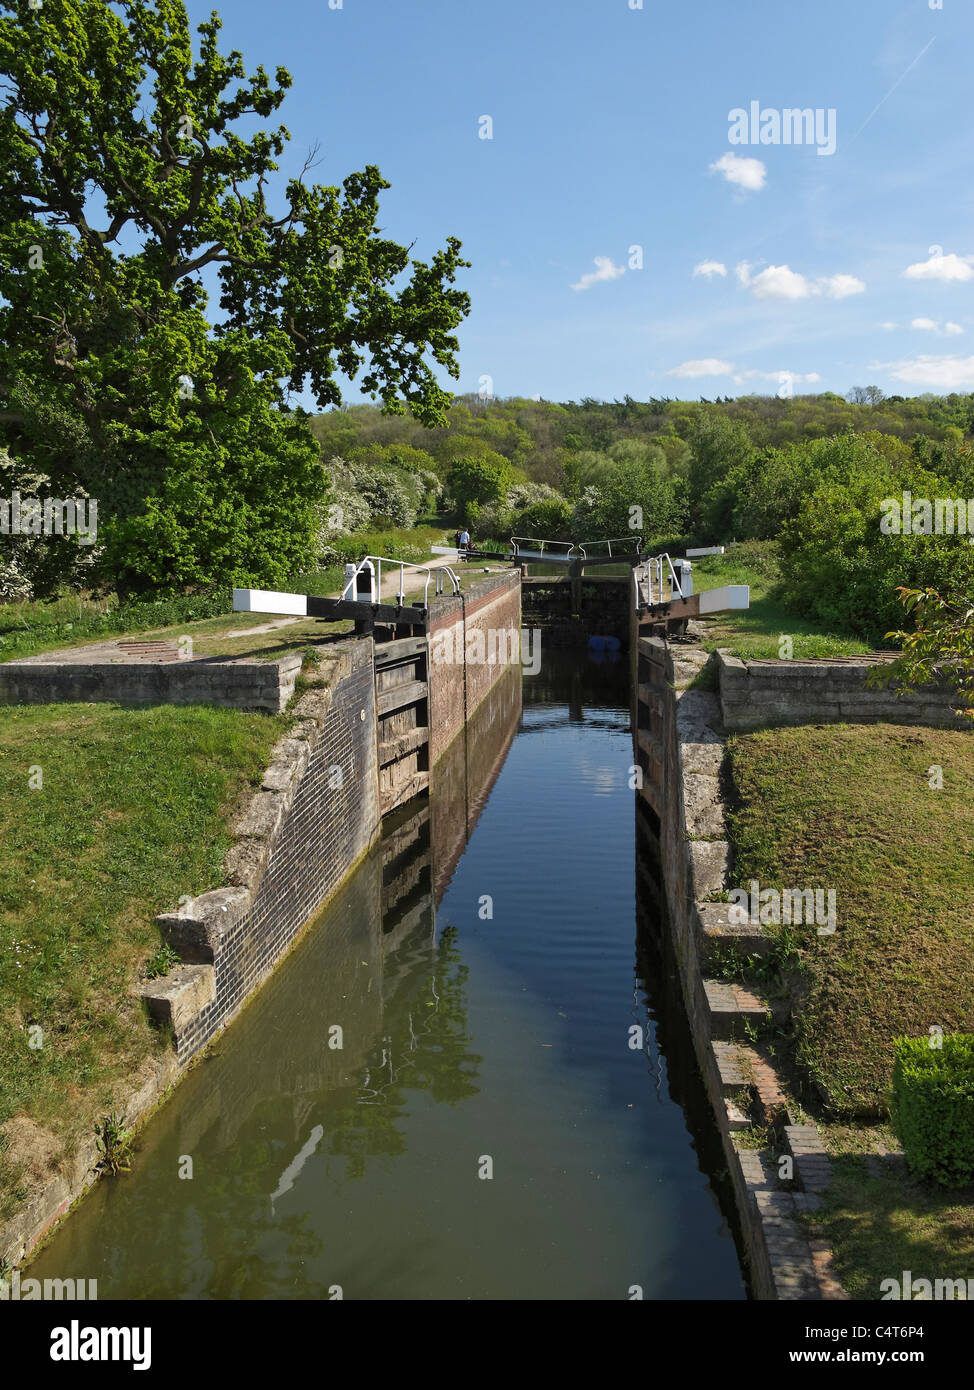 Woolsthorpe Middle Lock (No 17), The Grantham Canal, Woolsthorpe-by-Belvoir, Lincolnshire, England. Stock Photo